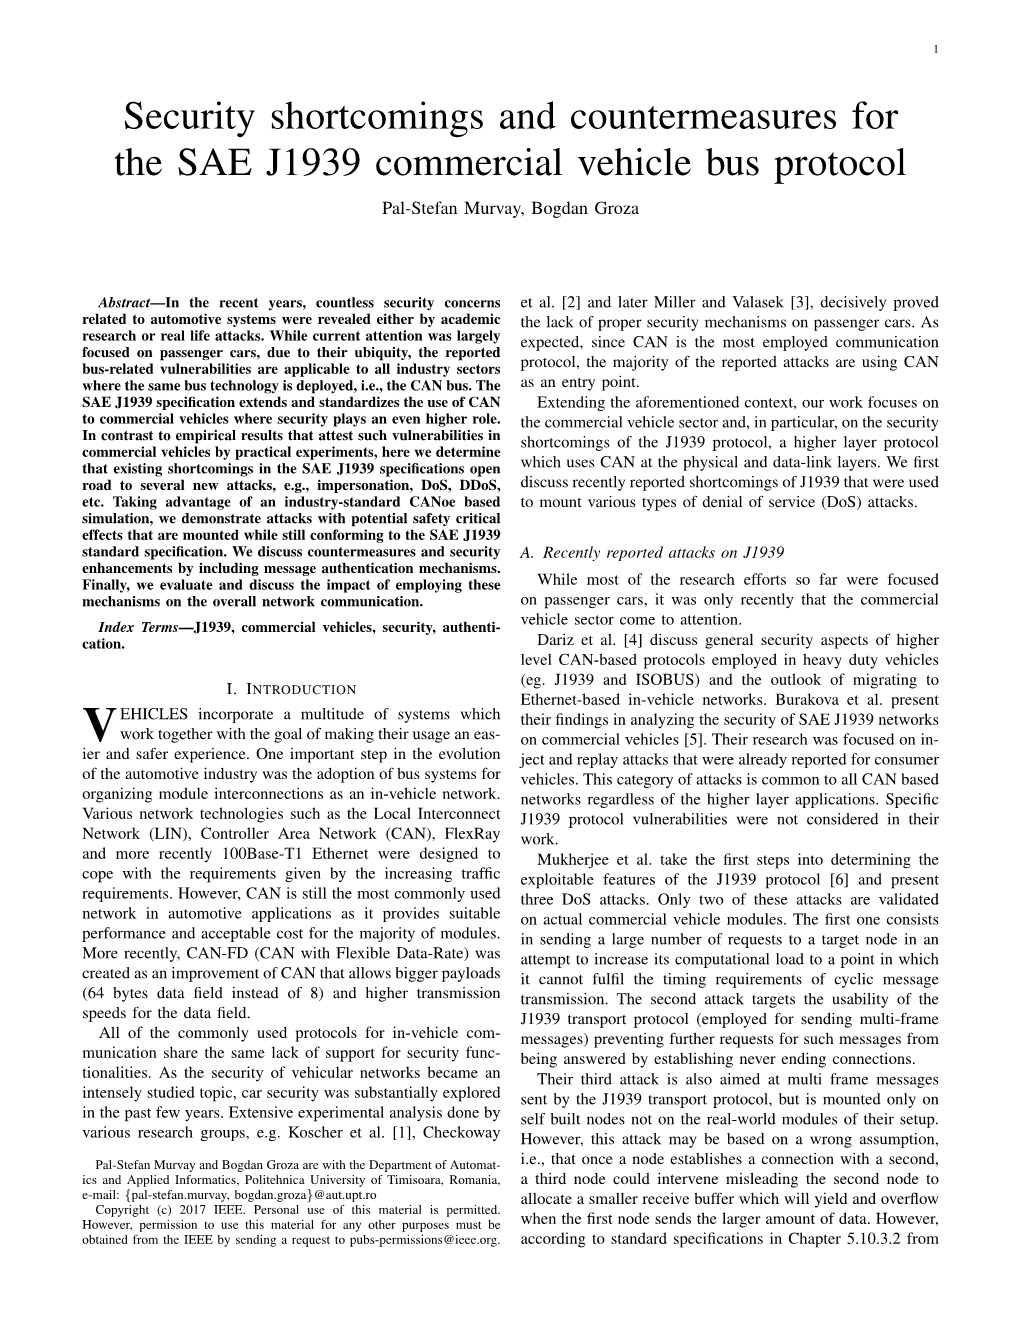 Security Shortcomings and Countermeasures for the SAE J1939 Commercial Vehicle Bus Protocol Pal-Stefan Murvay, Bogdan Groza